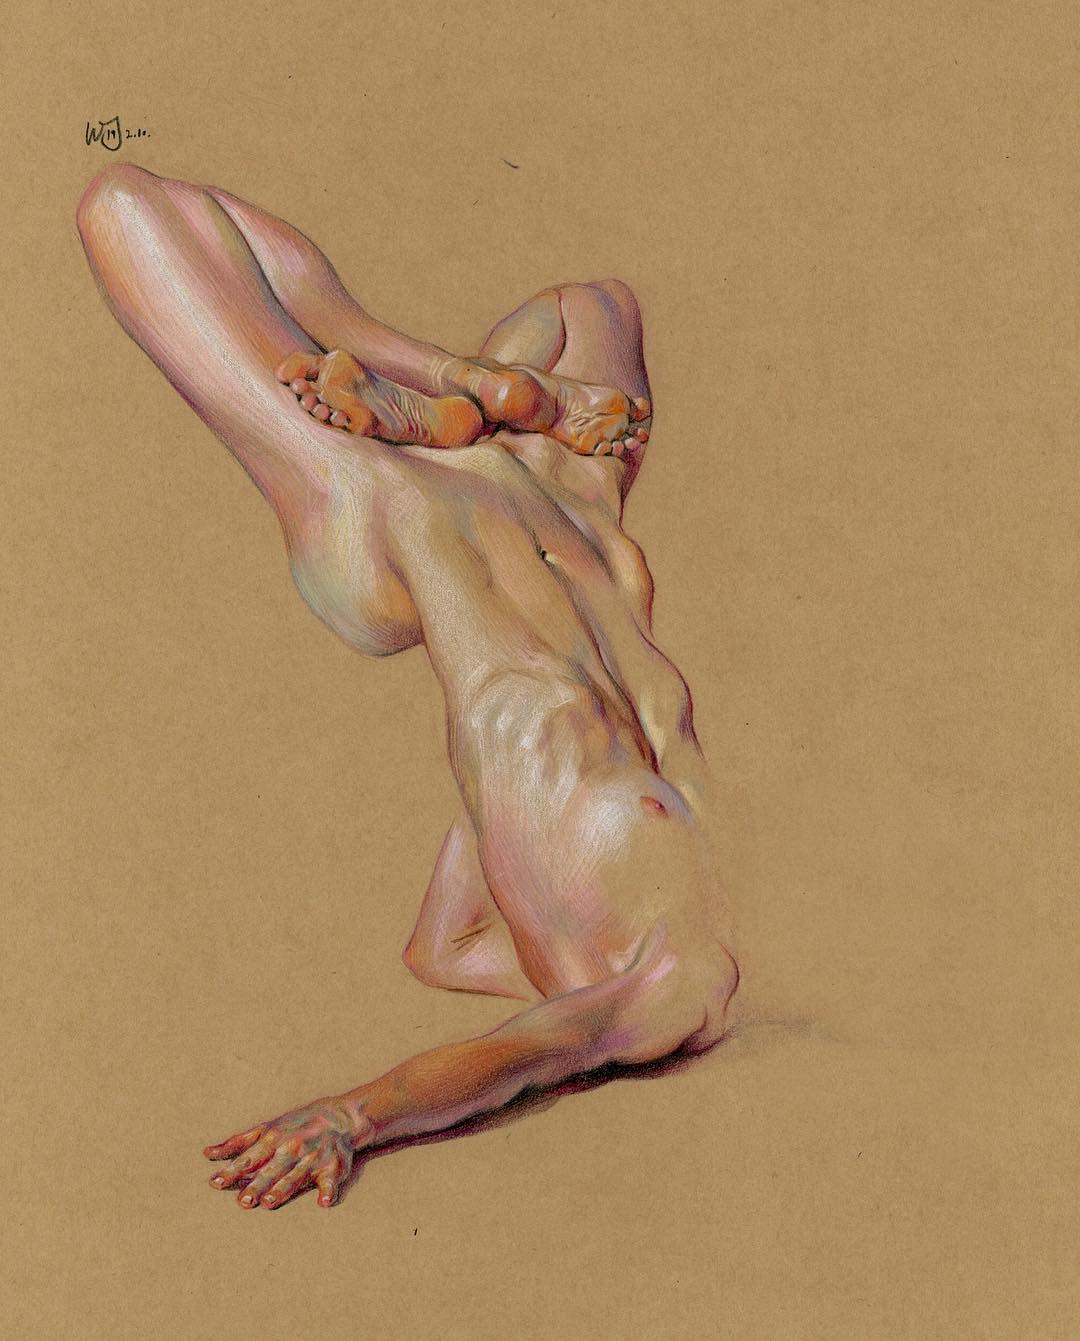 Expressive Anatomical Colored Pencil Drawings By Wanjin Gim 15